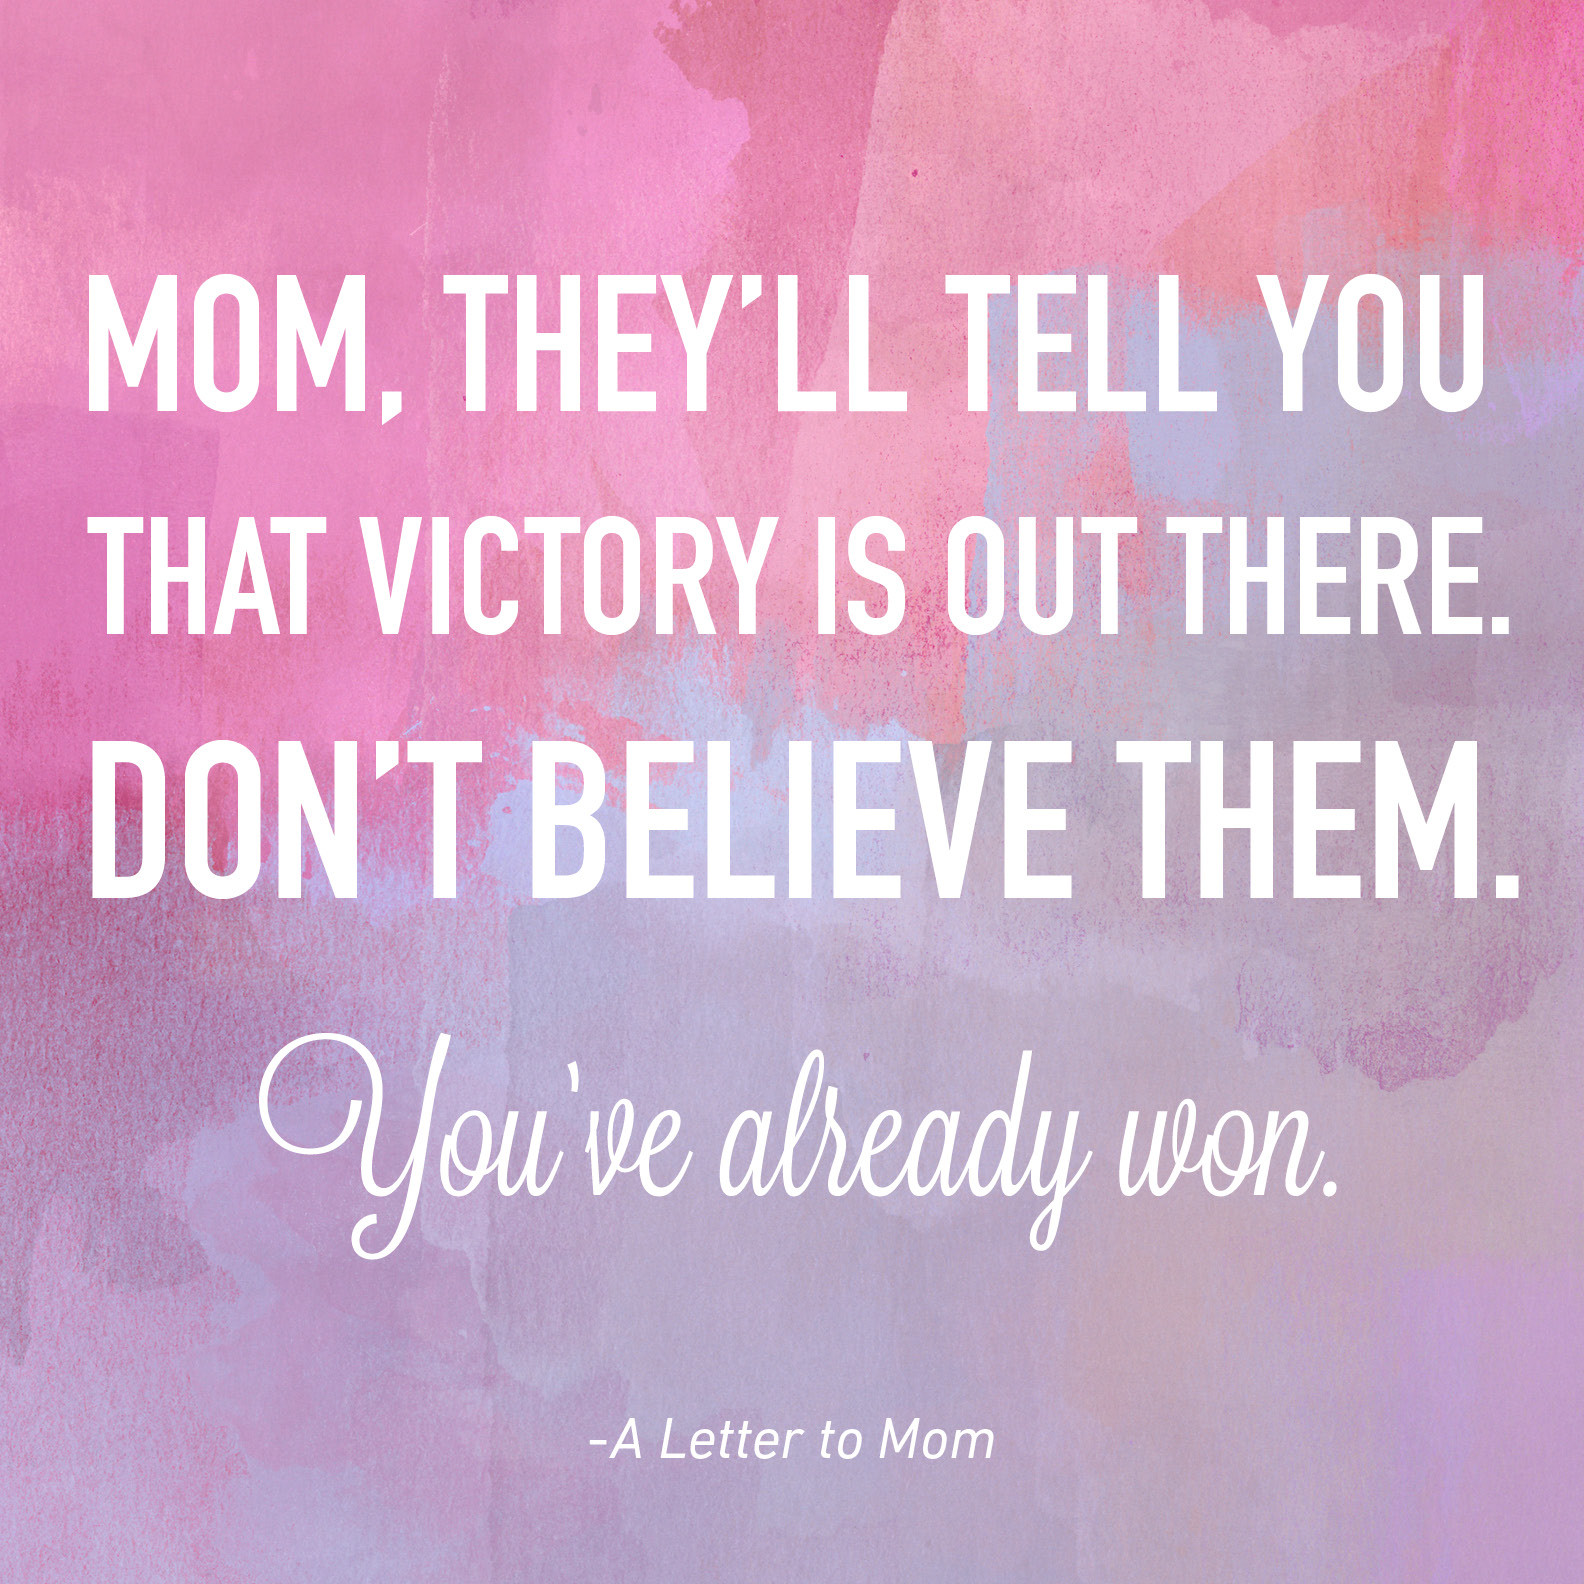 Famous Quotes About Mothers
 Mothers Day Quotes7